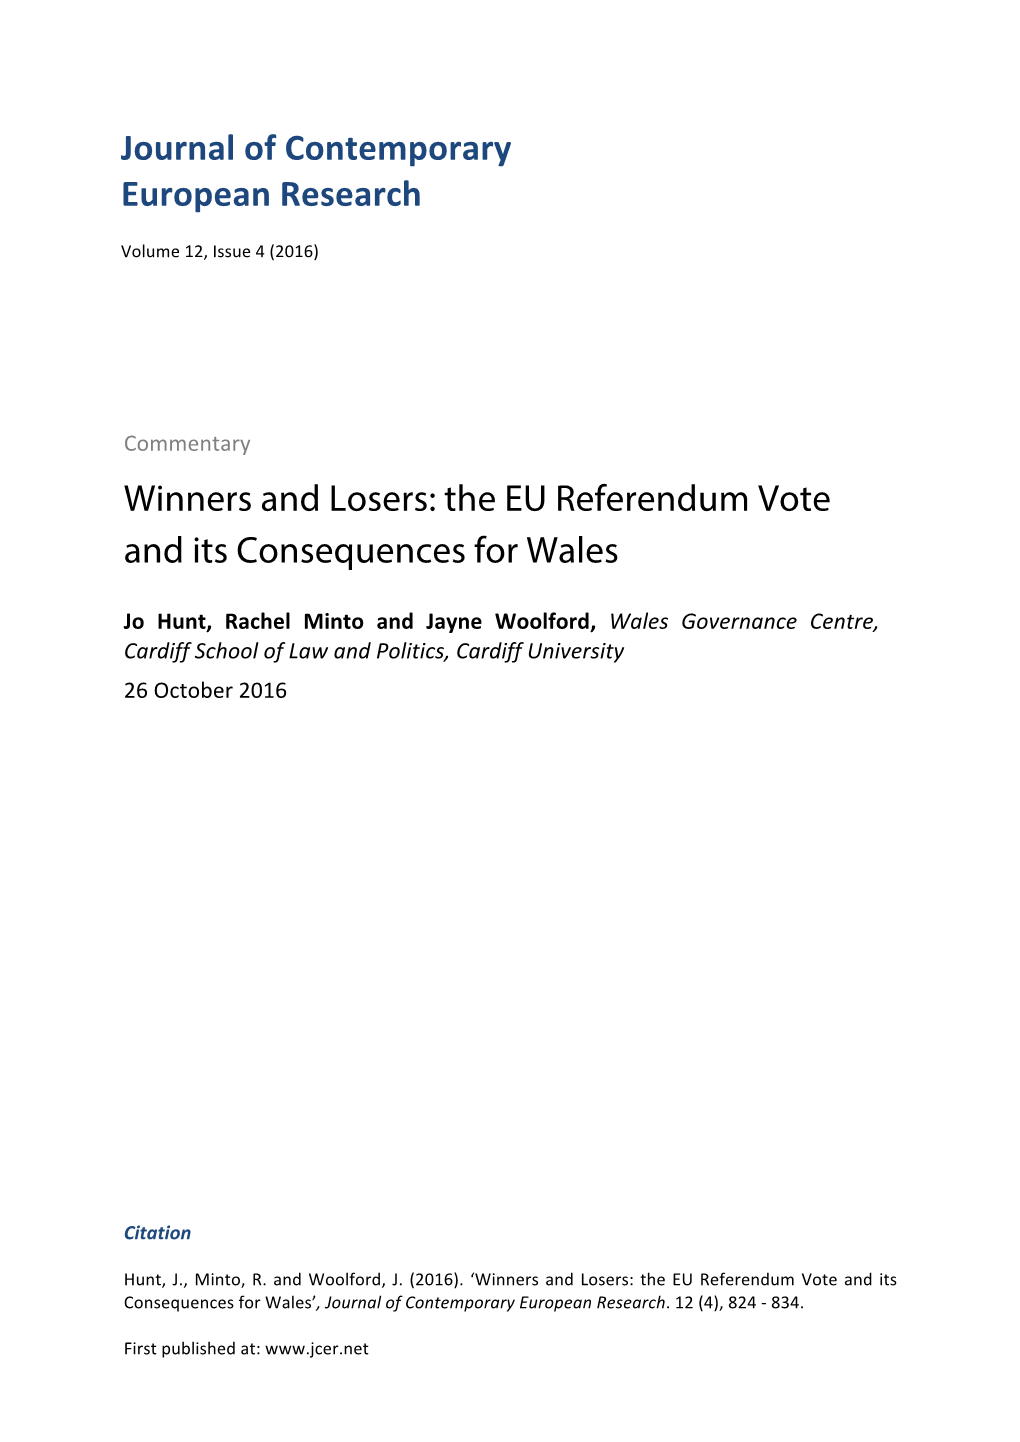 The EU Referendum Vote and Its Consequences for Wales